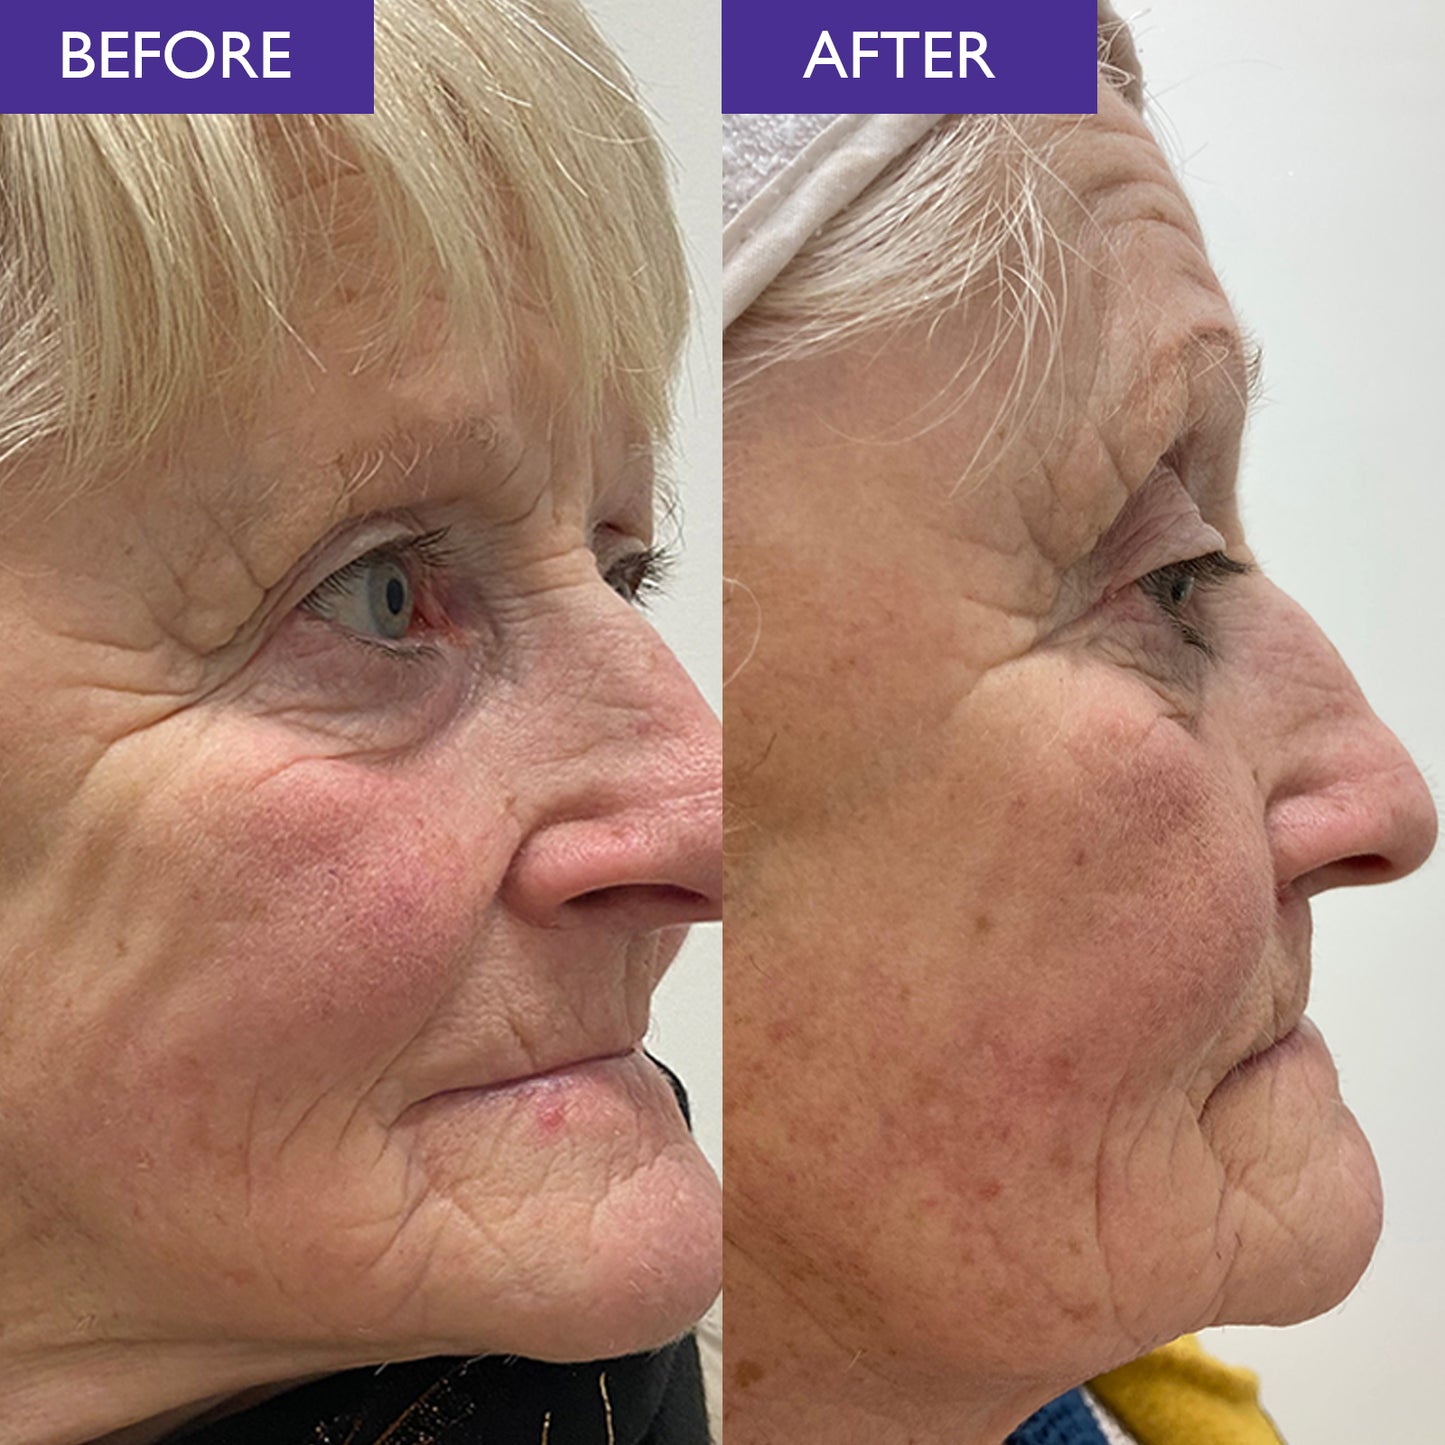 Retinol before and after comparision on a lady with wrinkles and sagging skin